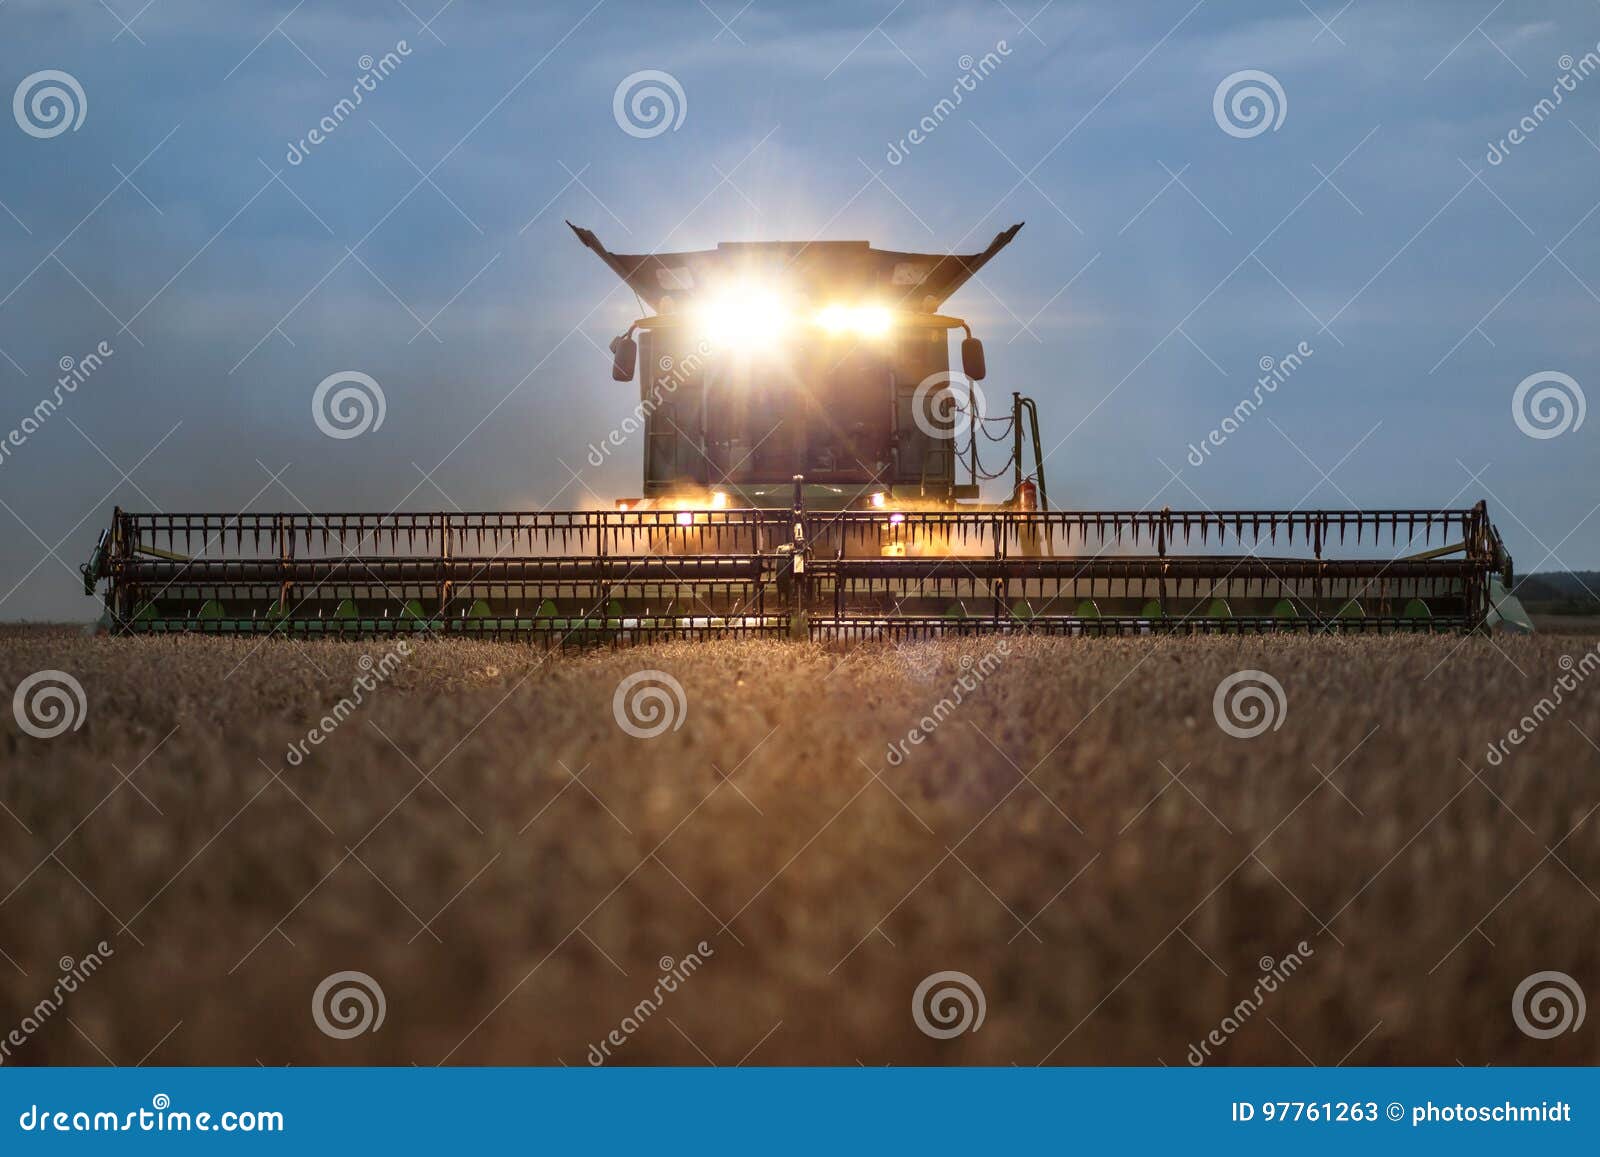 front view of a combine harvester in the evening